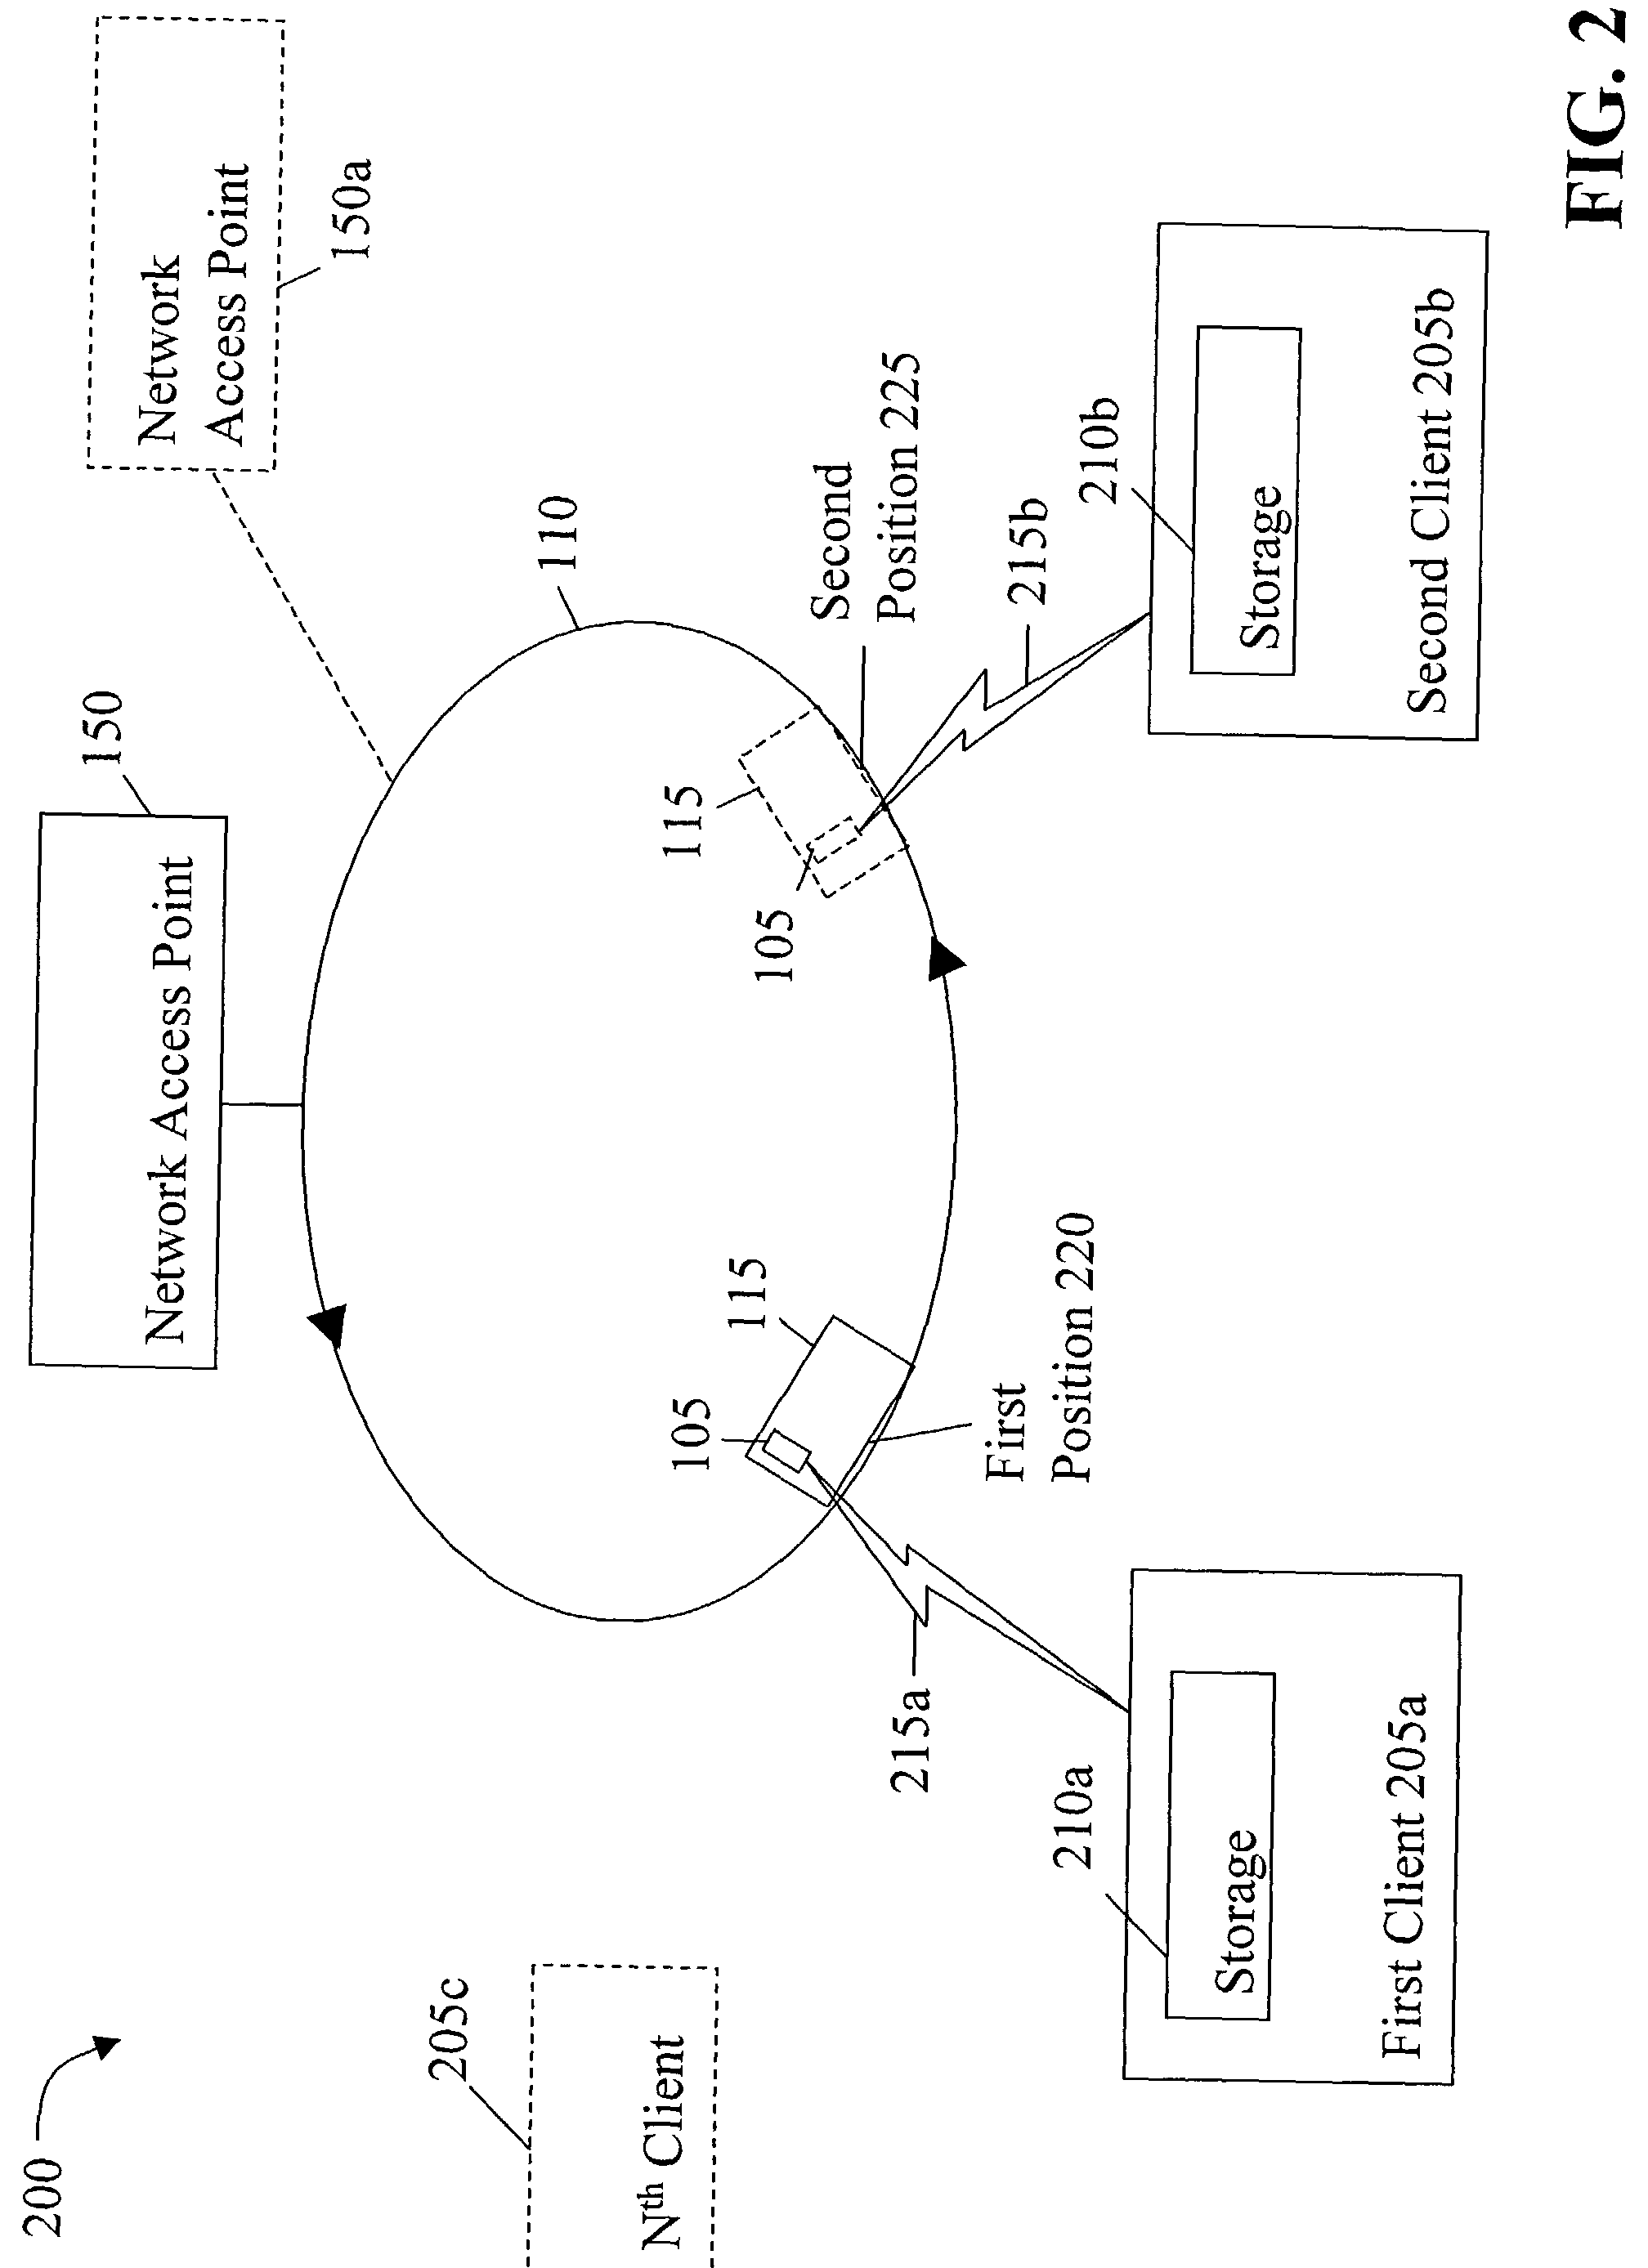 Hybrid wireless network for data collection and distribution